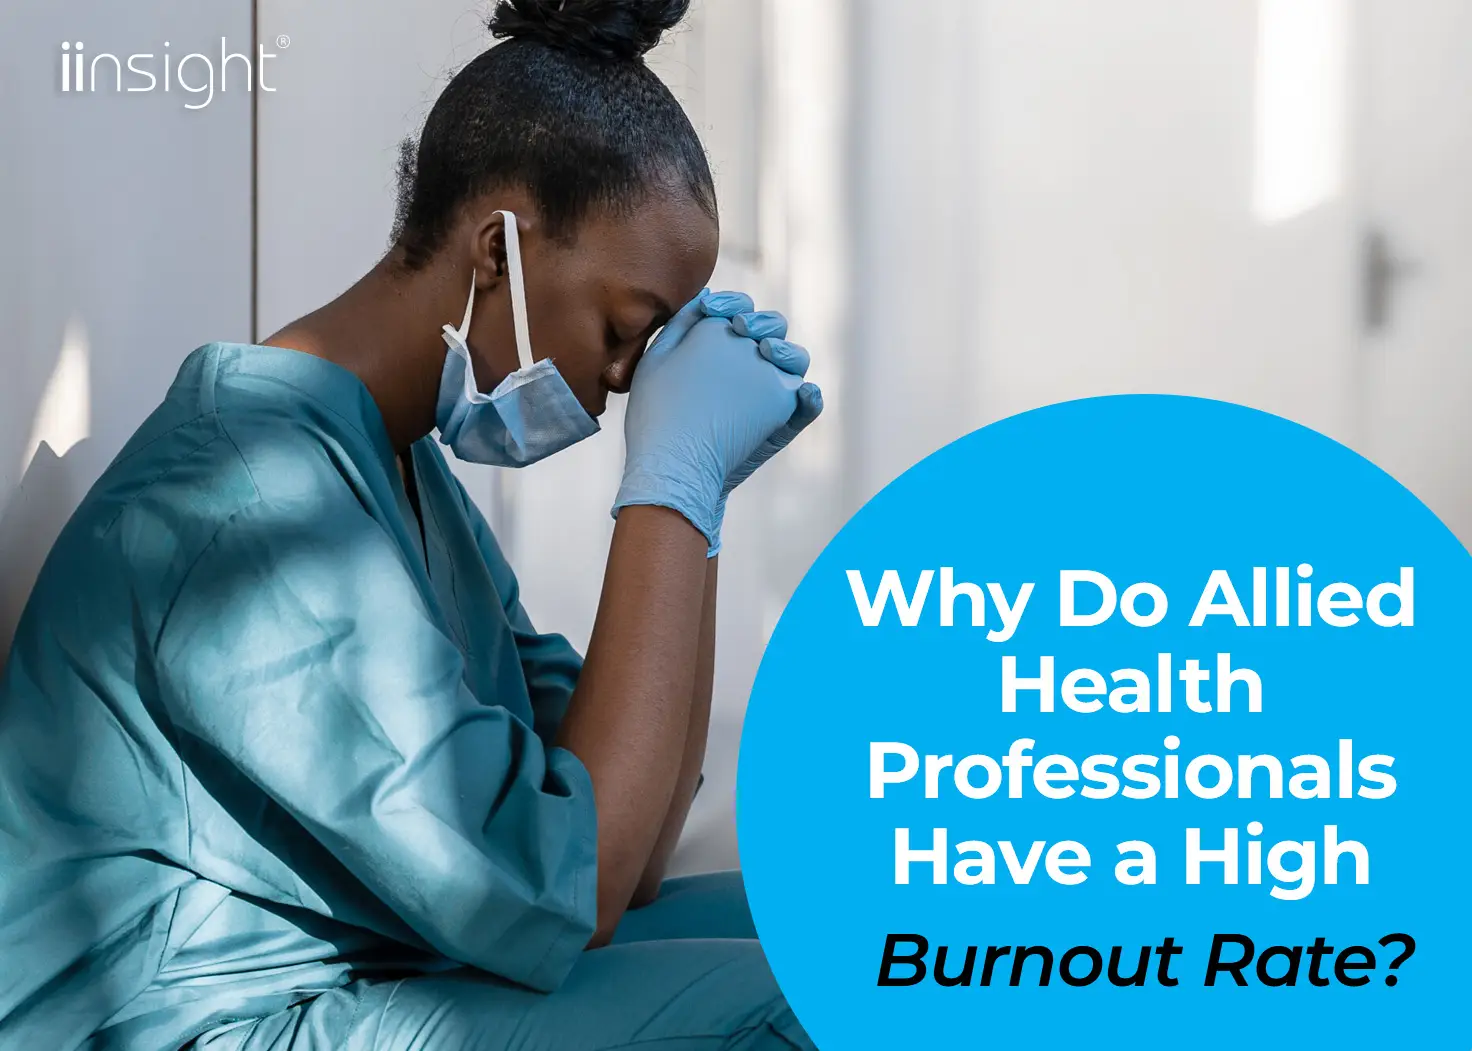 Why Do Allied Health Professionals Have a High Burnout Rate?